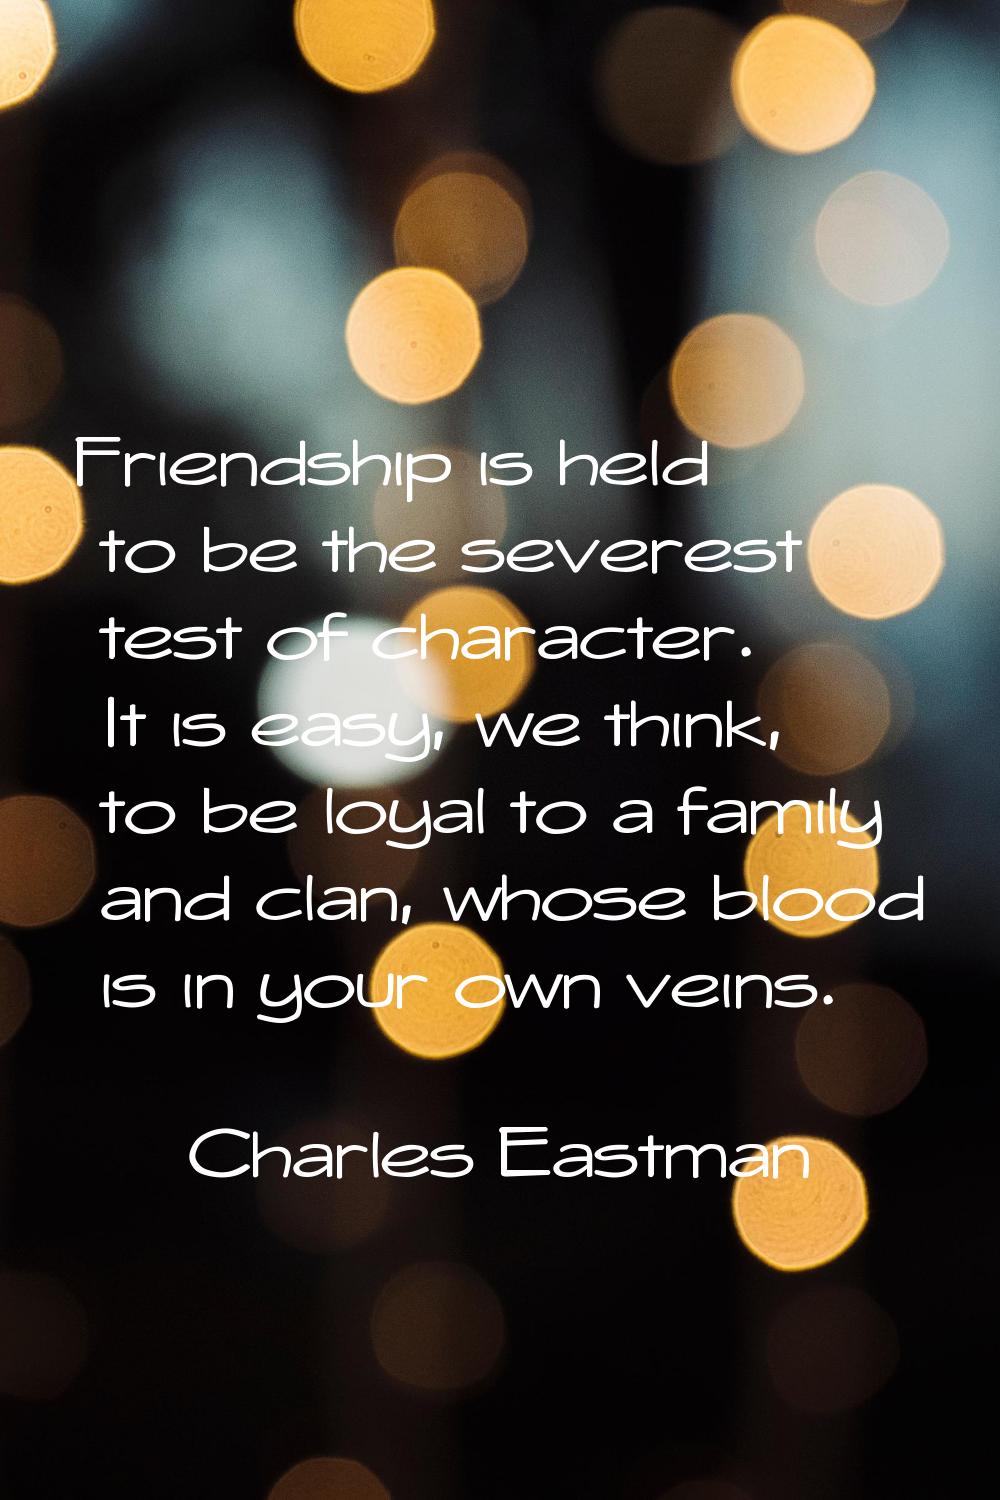 Friendship is held to be the severest test of character. It is easy, we think, to be loyal to a fam